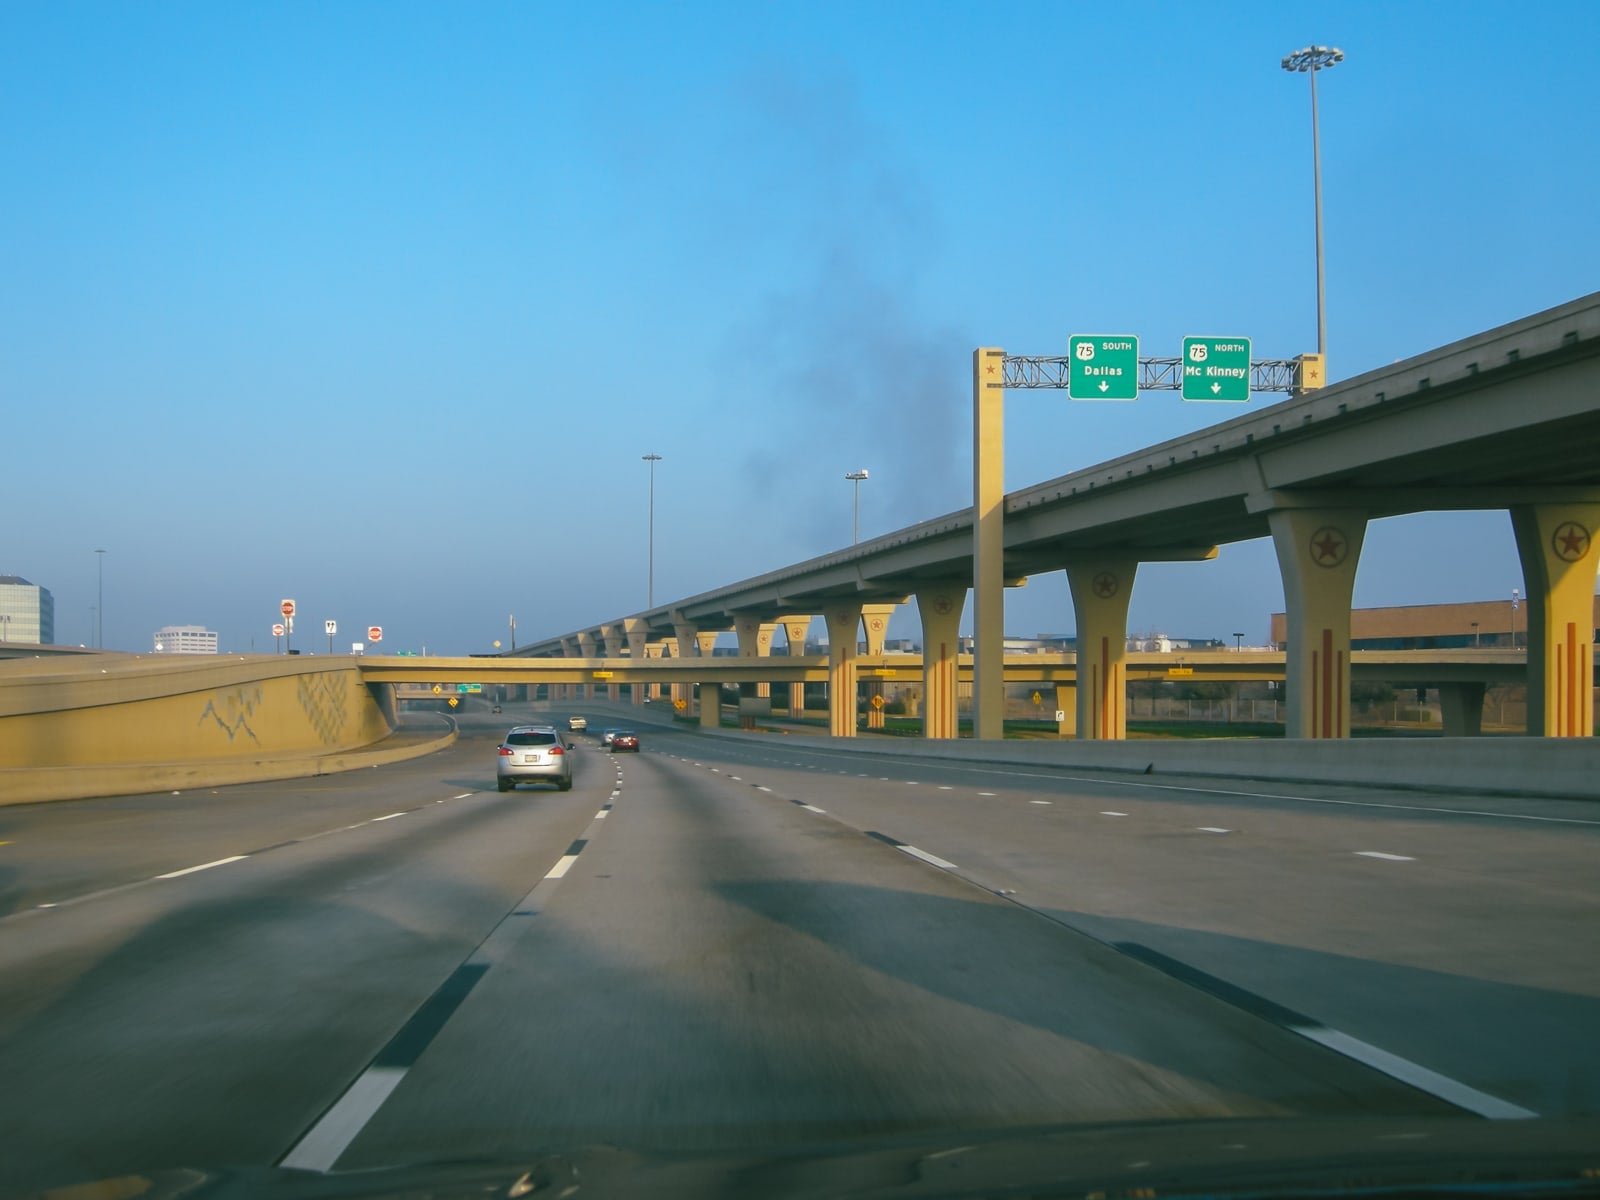 Commuting in Dallas on highway 635